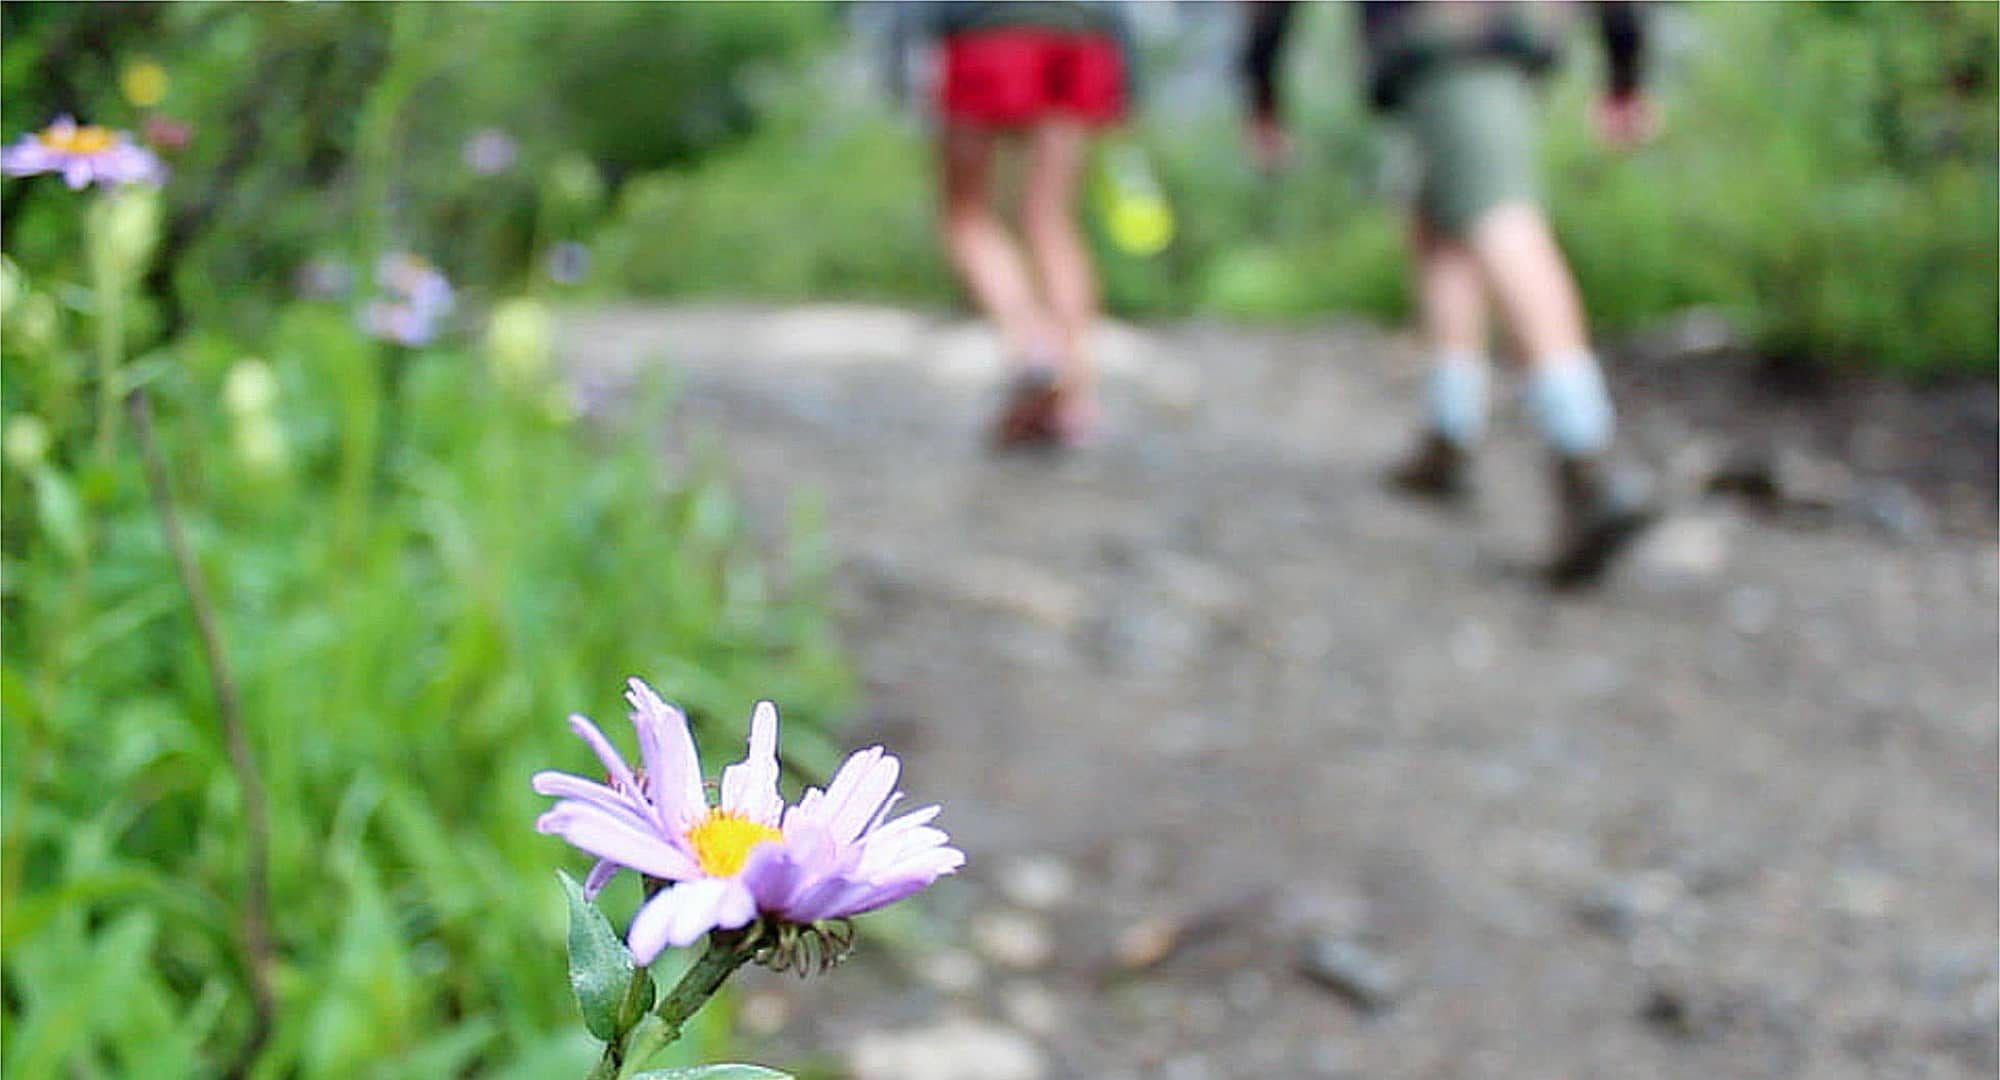 Two hikers on a trail with a wildflower in the foreground